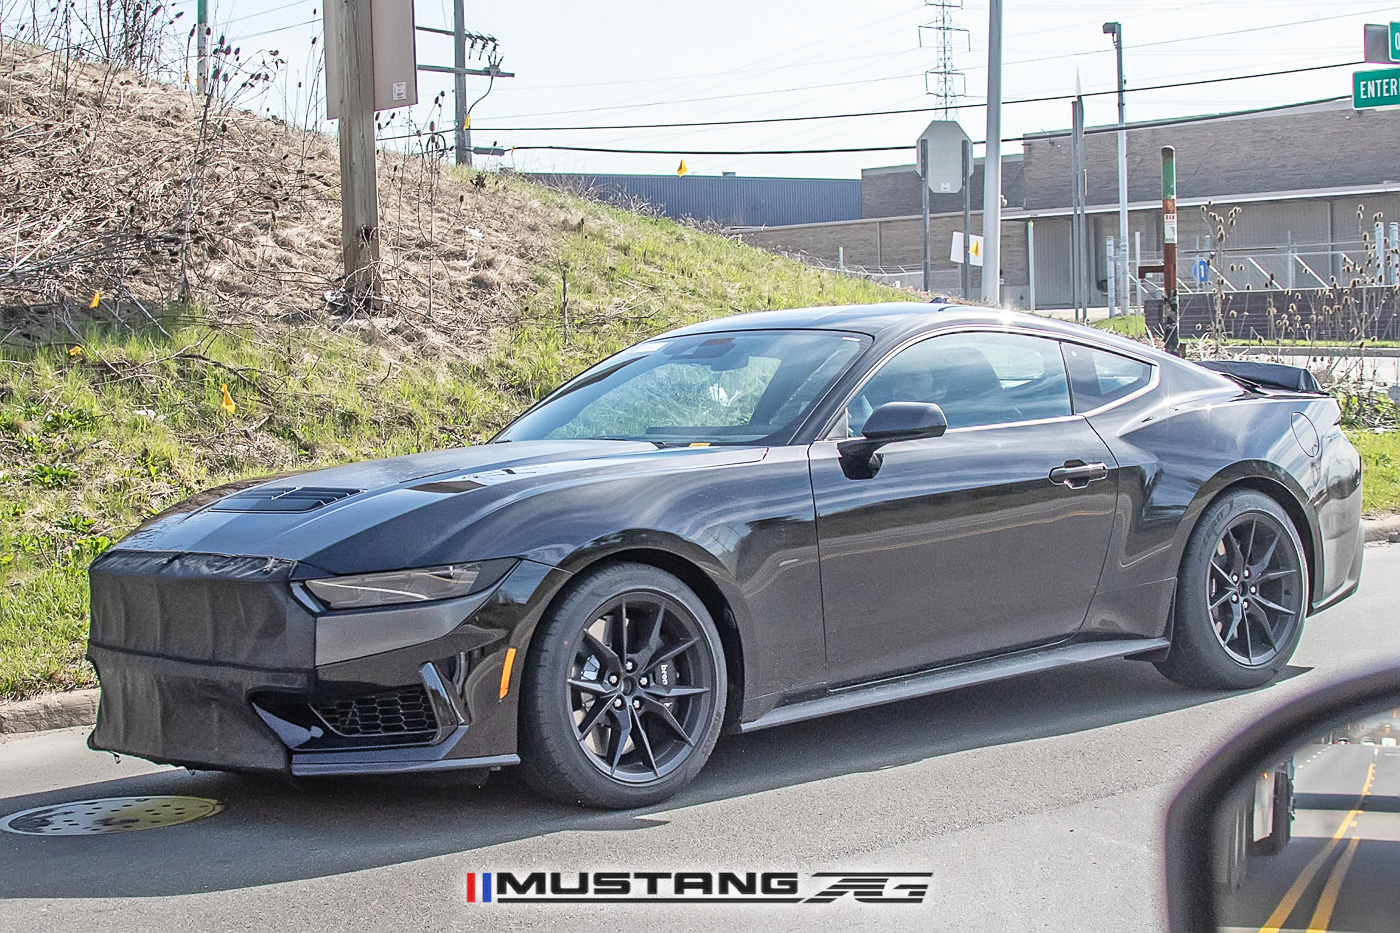 S650 Mustang 📸 Mustang GT3 Road-Version Prototype Spied Testing with Center-Exit Exhaust s650-mustang-variant-prototype-center-exit-exhaust-2